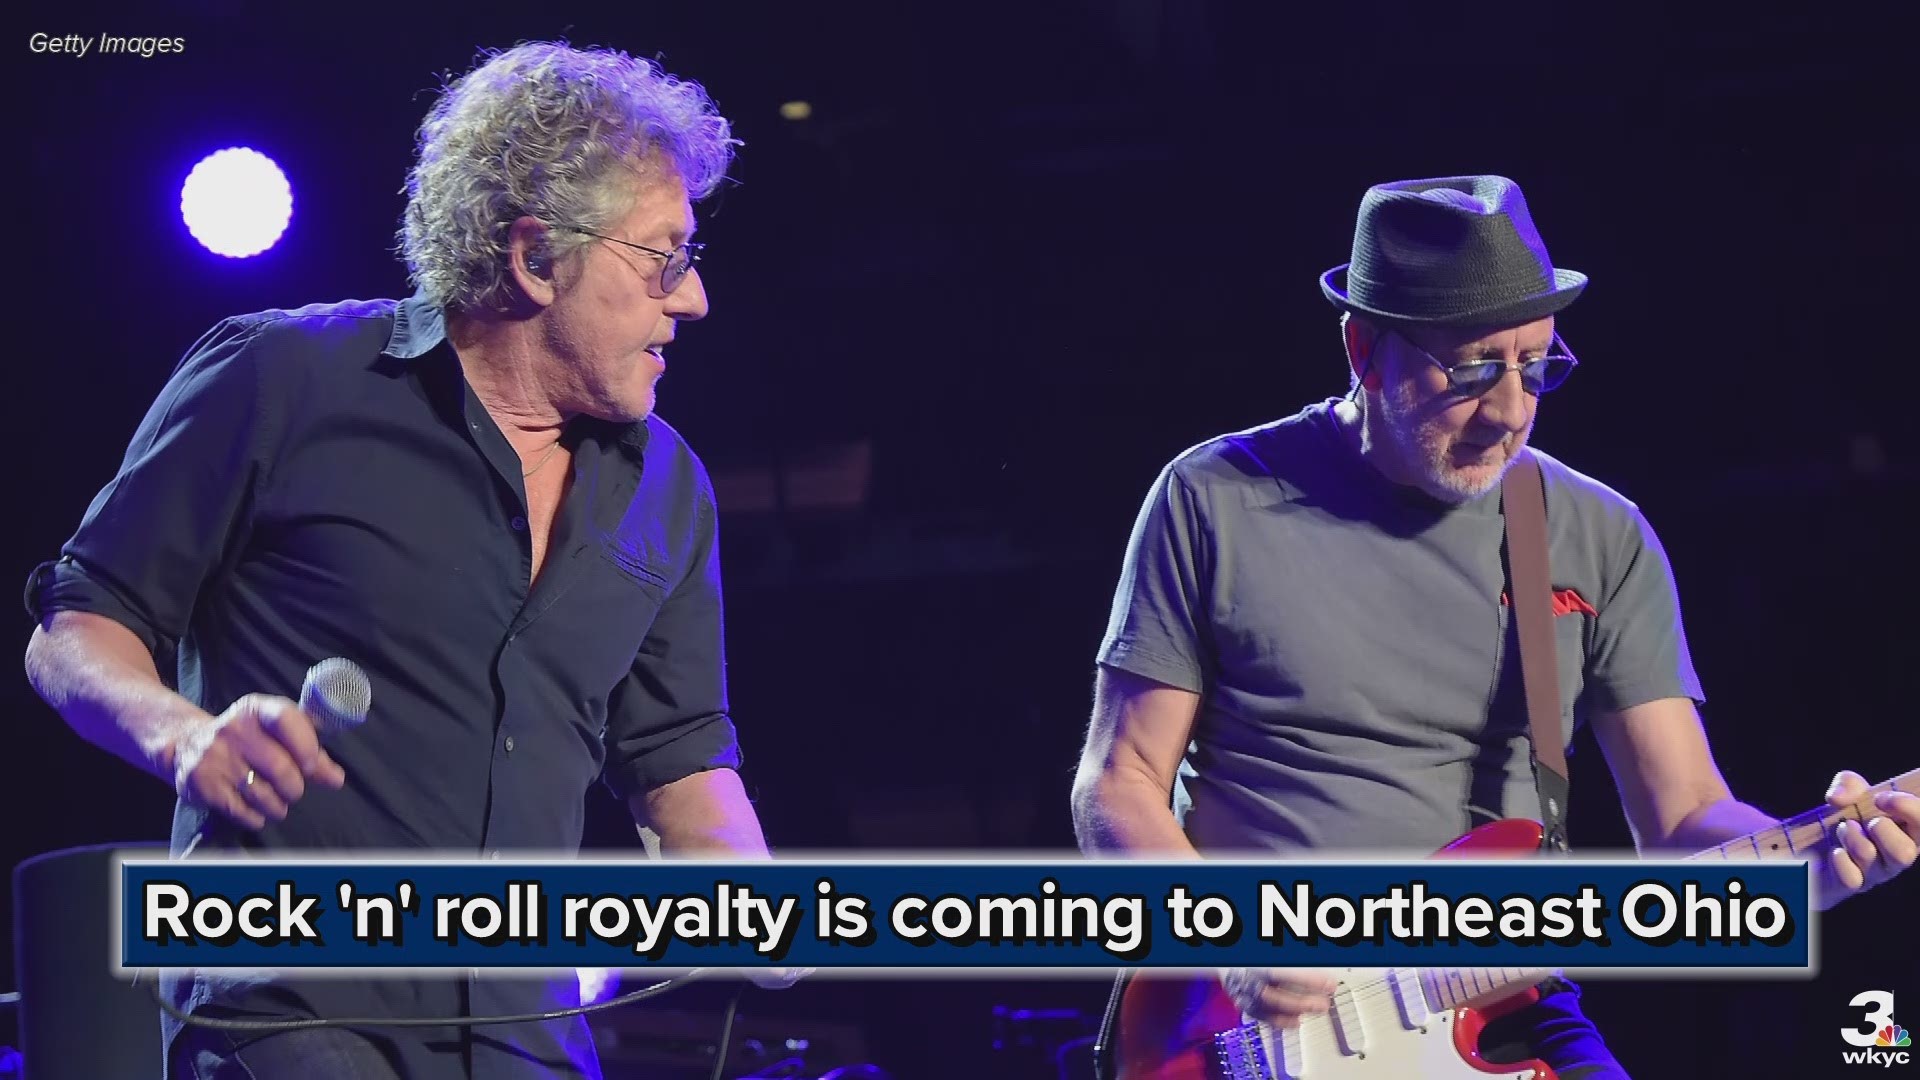 Rock 'n' roll royalty is coming to Northeast Ohio.